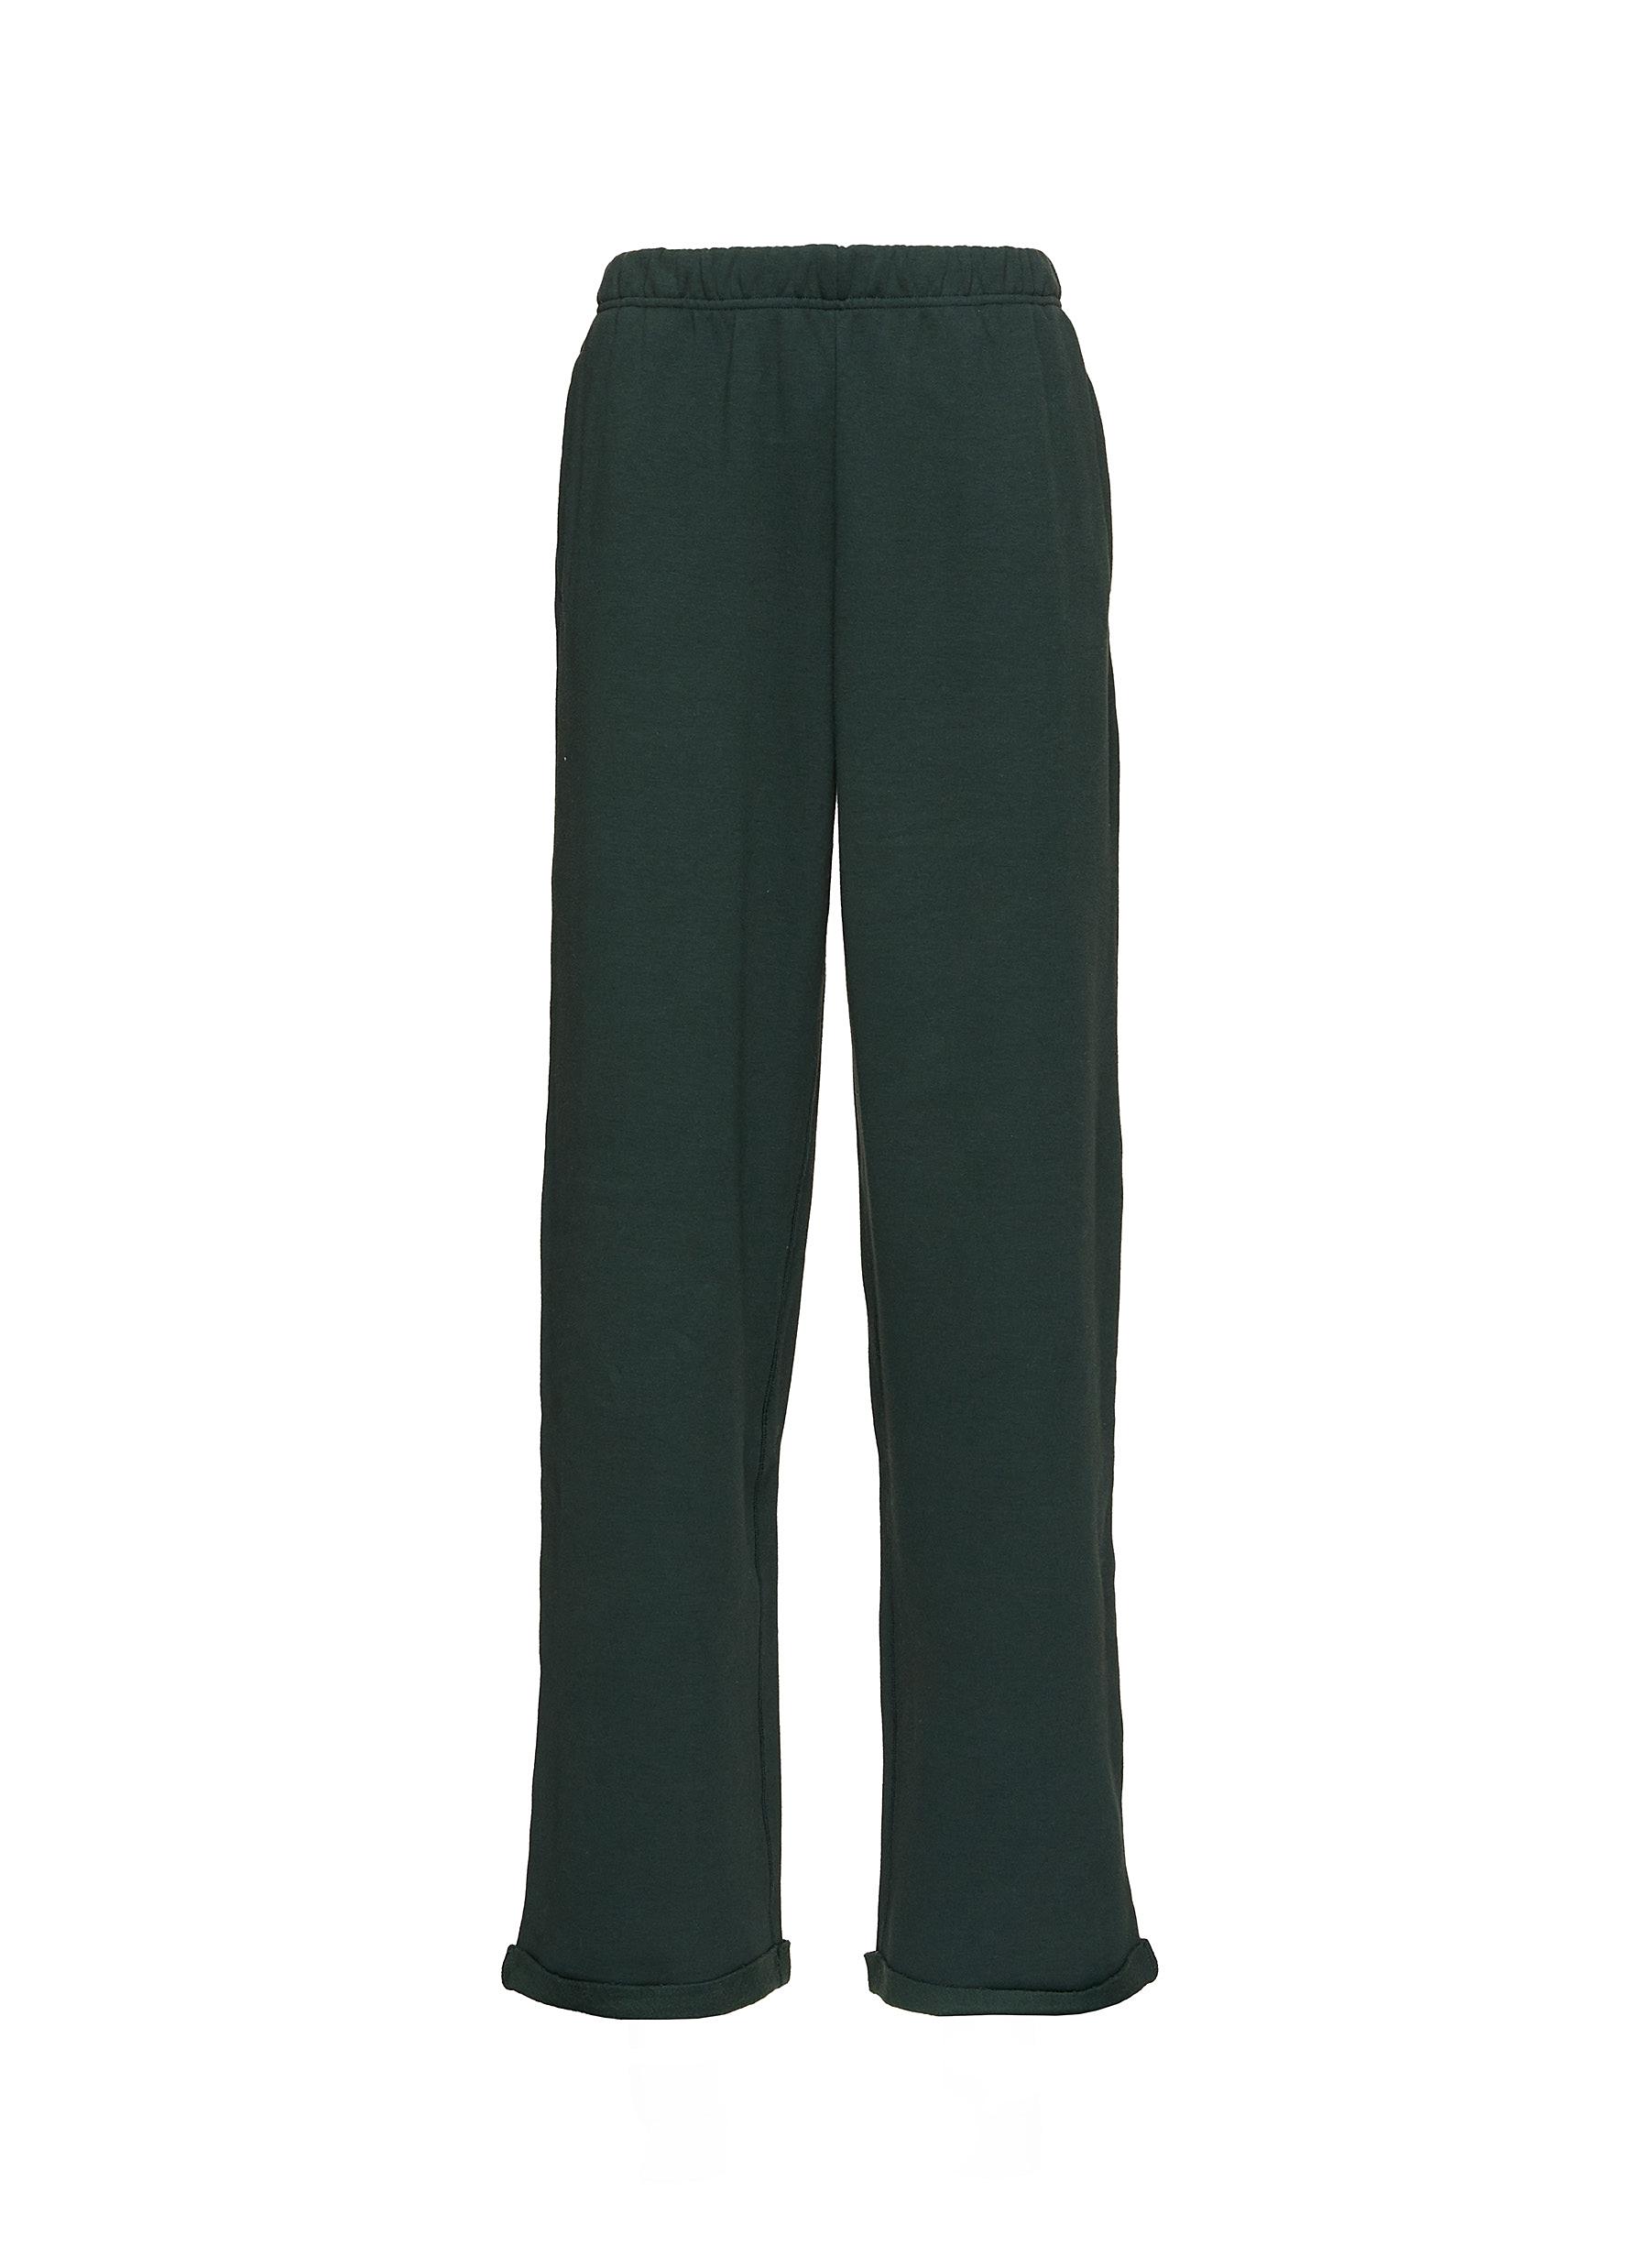 Buy JUNIPER Women's Sand Grey Cotton Solid Straight Pants With Side Pocket  | Shoppers Stop